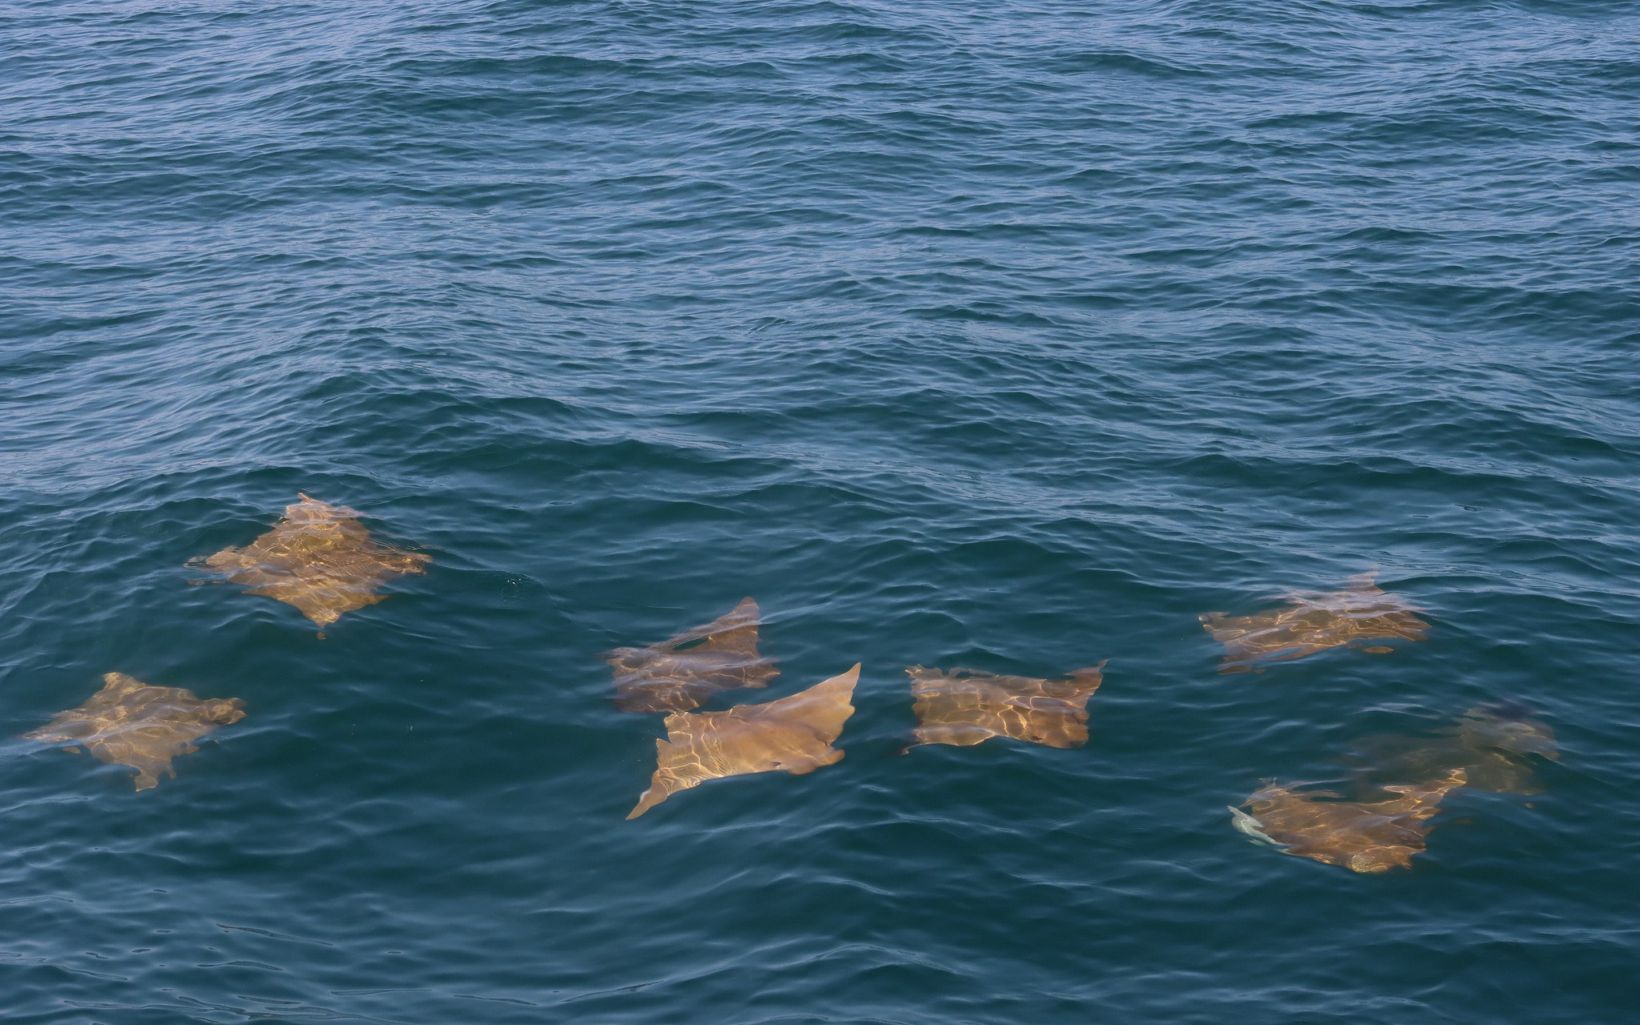 Group of cownose rays swimming in the ocean. 